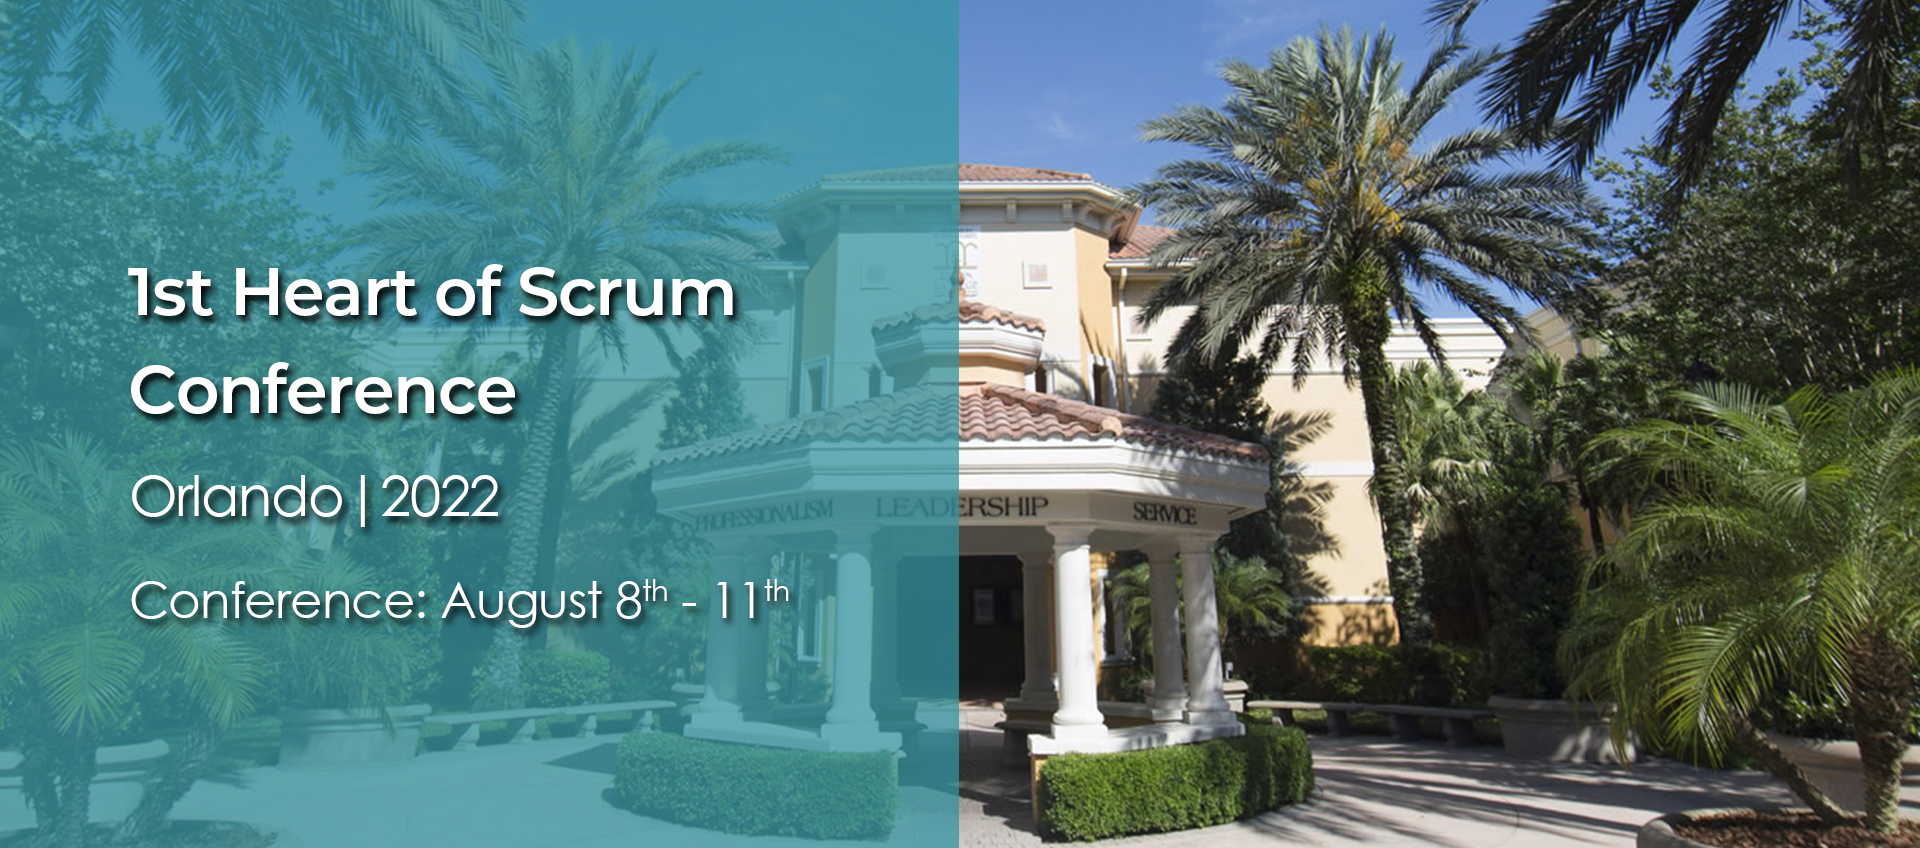 1st Heart of Scrum Conference Orlando 2022, Conference August 8th to 11th